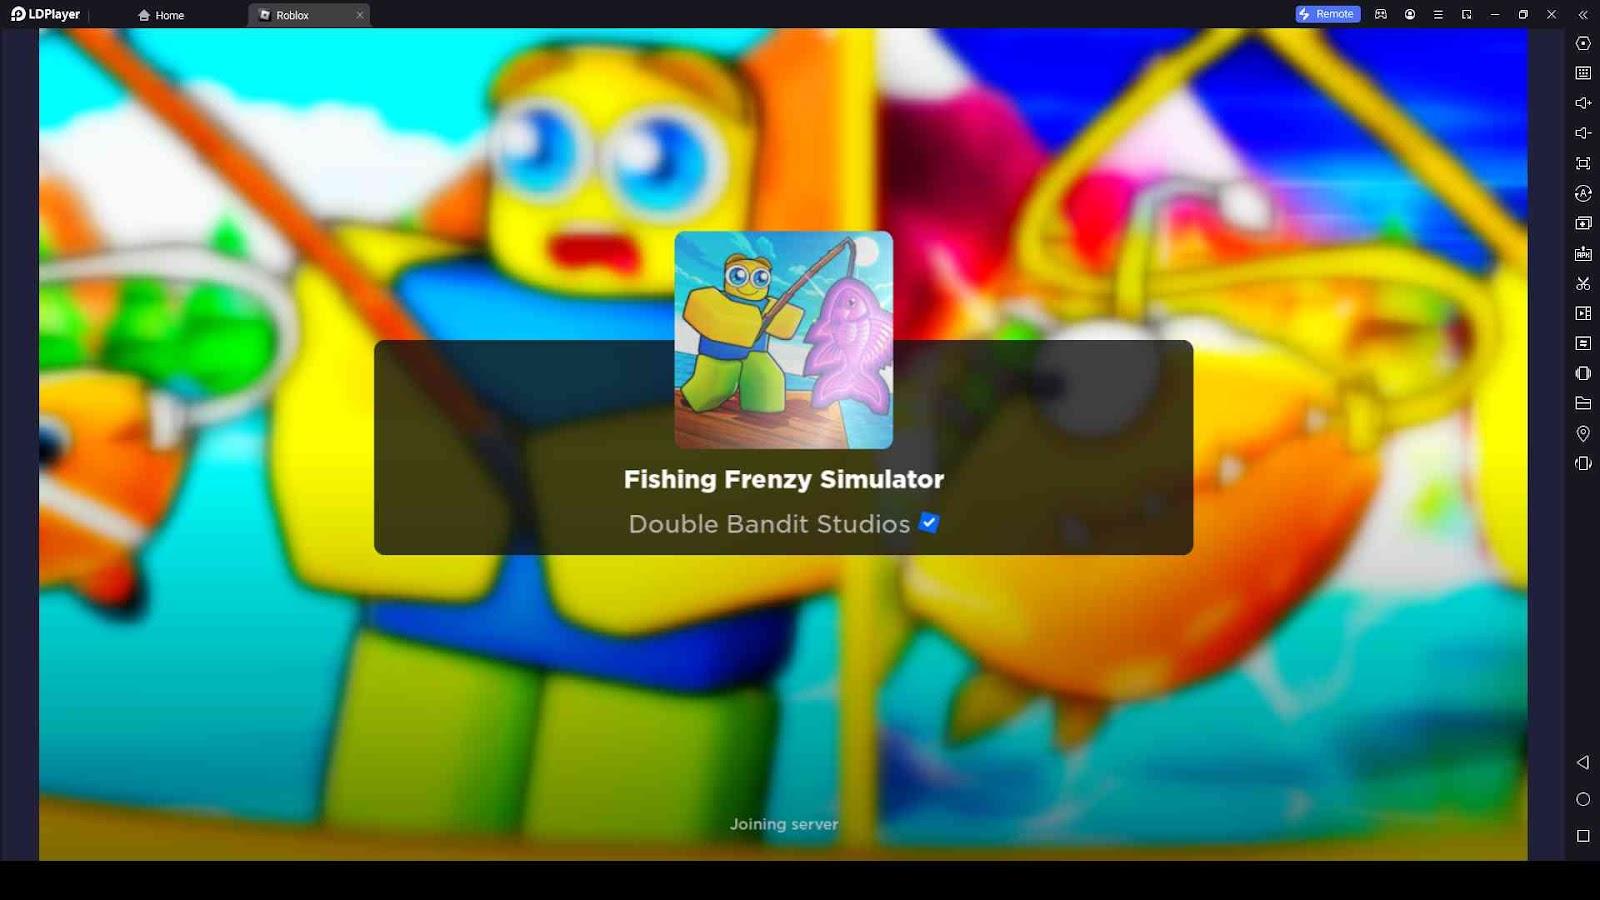 Fishing Simulator codes for free in-game gifts (December 2023